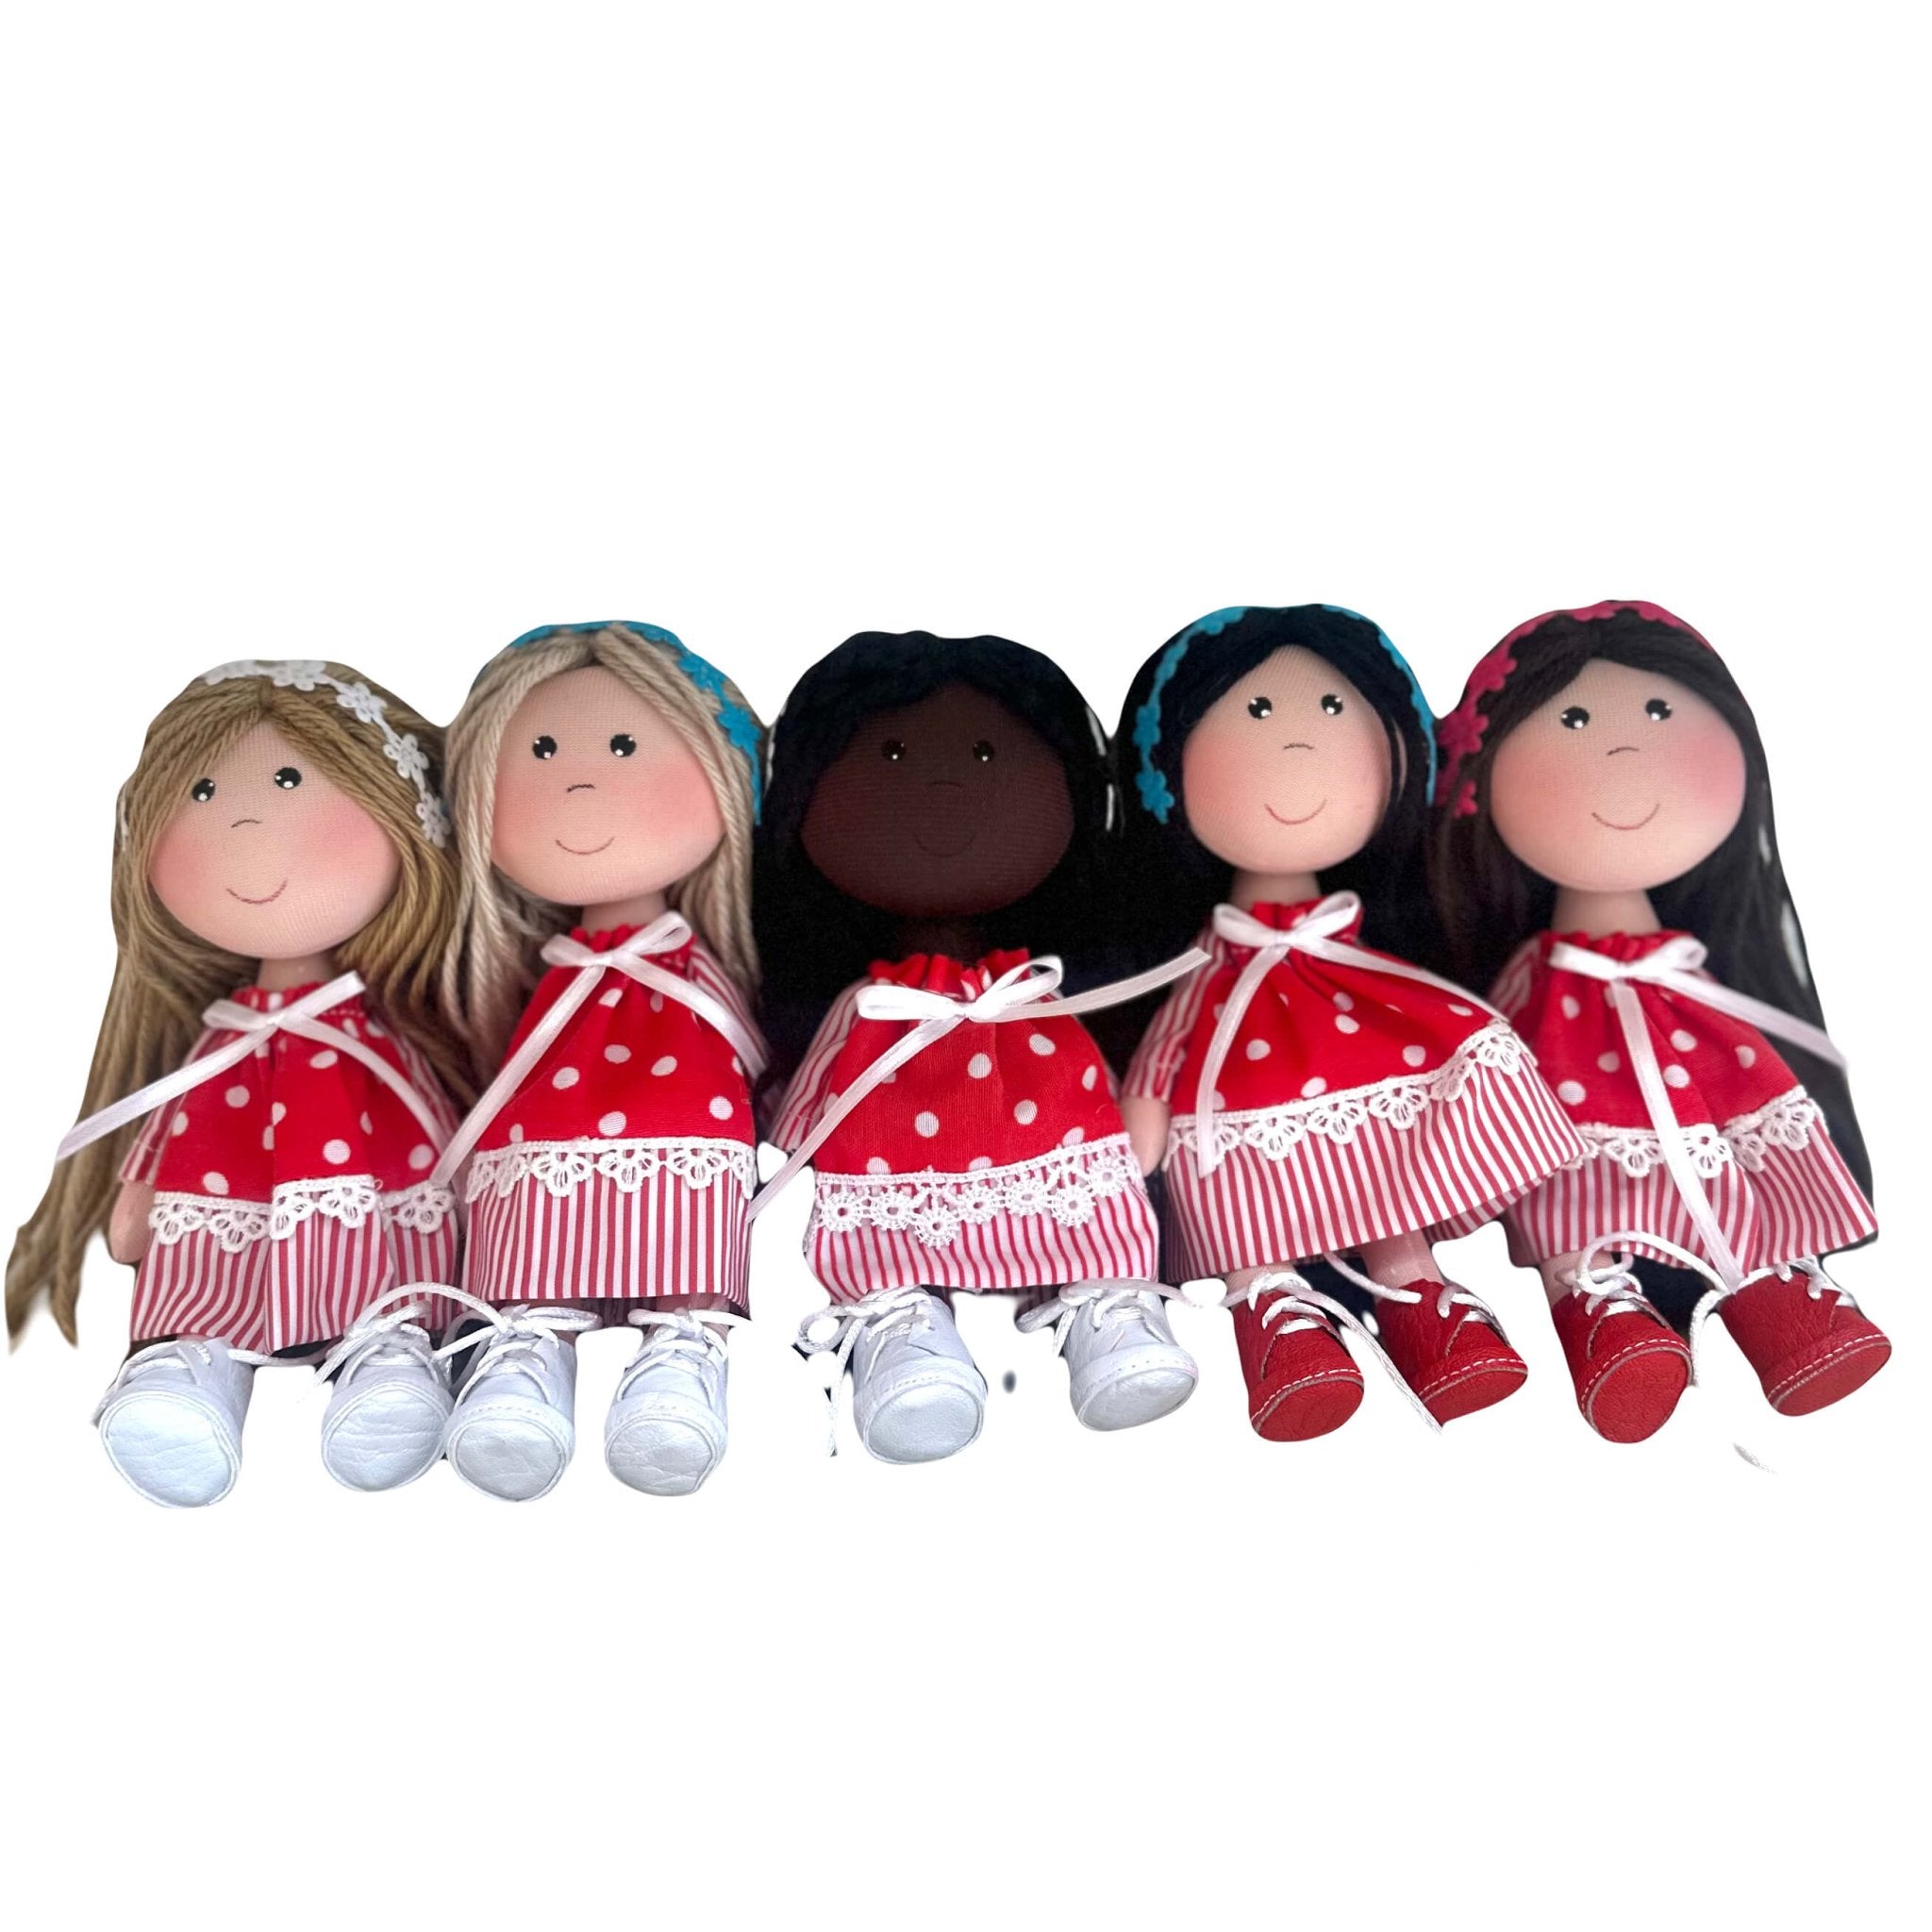 Cute rag dolls handmade in Colombia. There are 5 dolls wearing a red polka dot dress with different skin and hair colors. They are also wearing flower headbands.